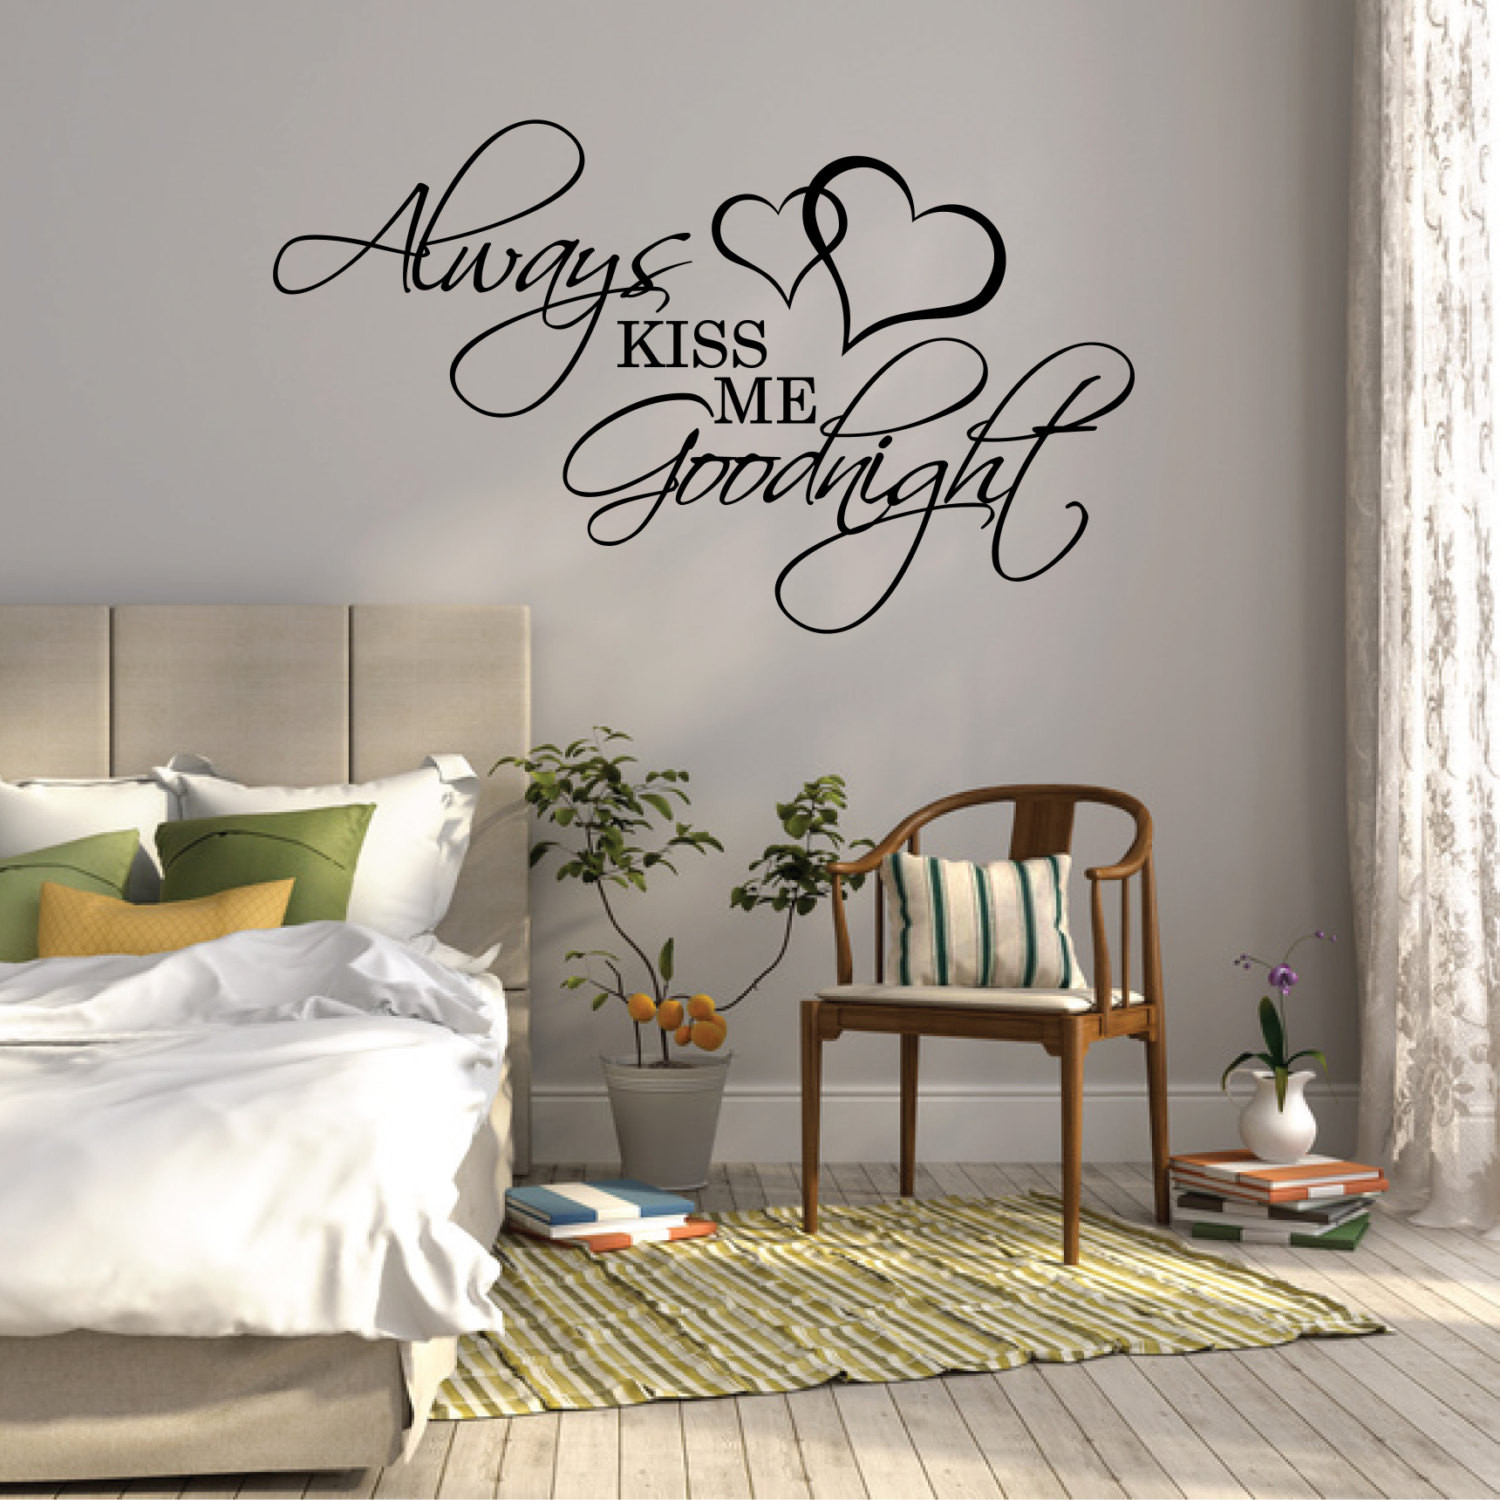 Bedroom Wall Decal
 Wall Sticker Quote Always KISS ME Goodnight Over bed wall